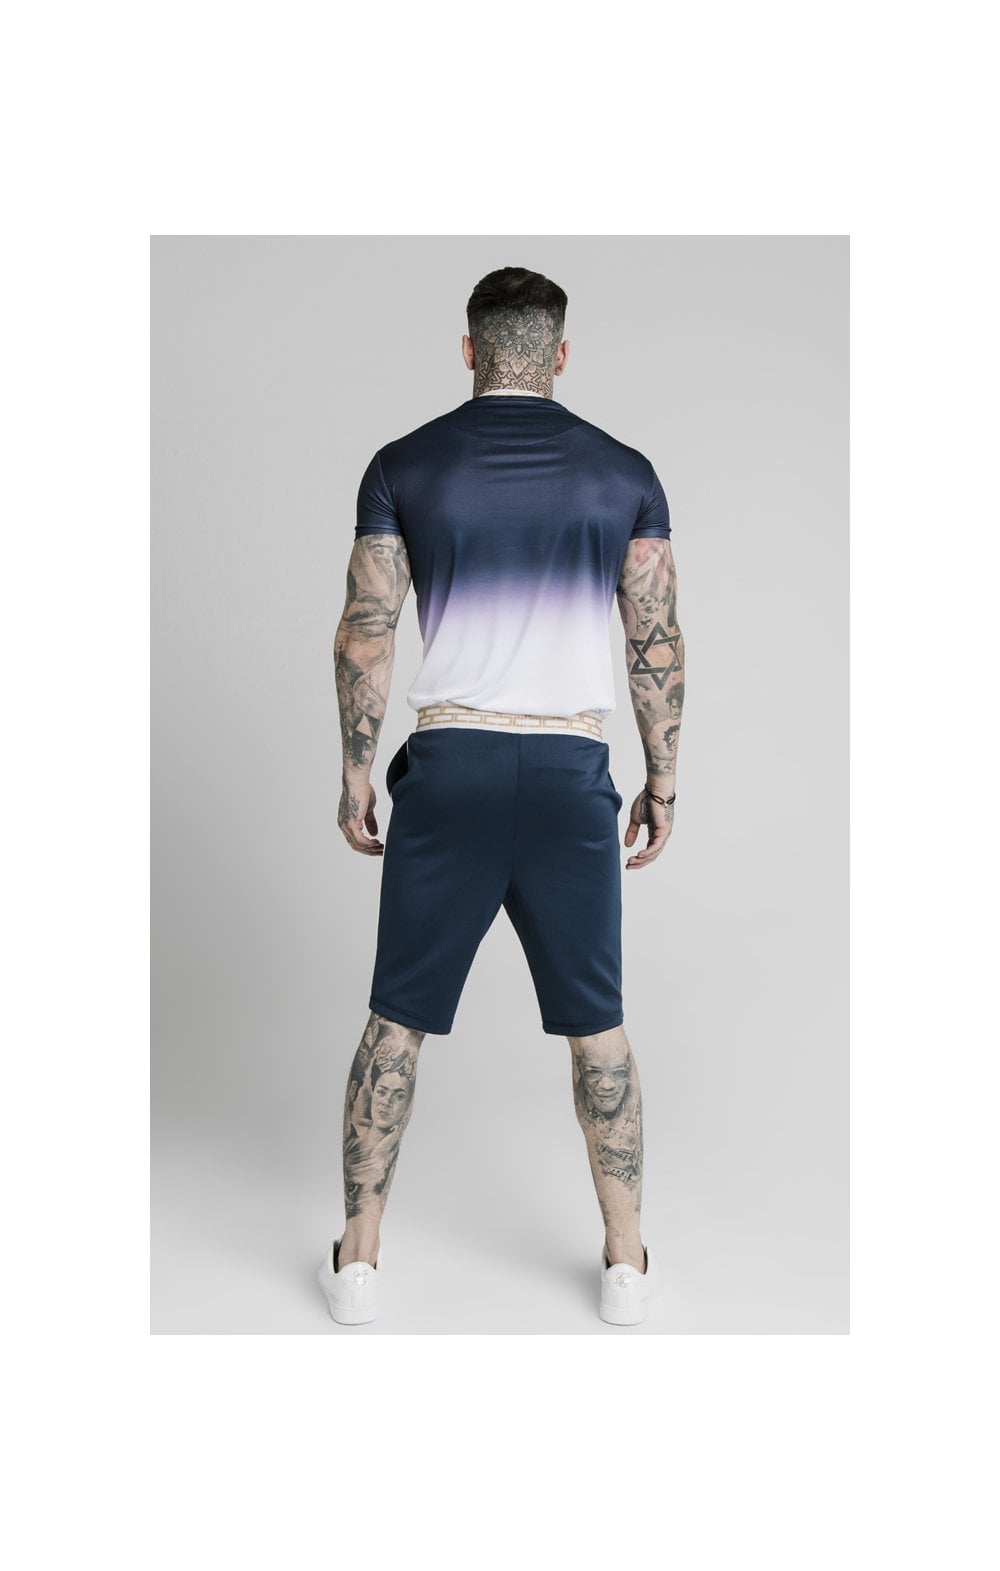 SikSilk S/S Fade Inset Tape Gym Tee - Navy & White (2)